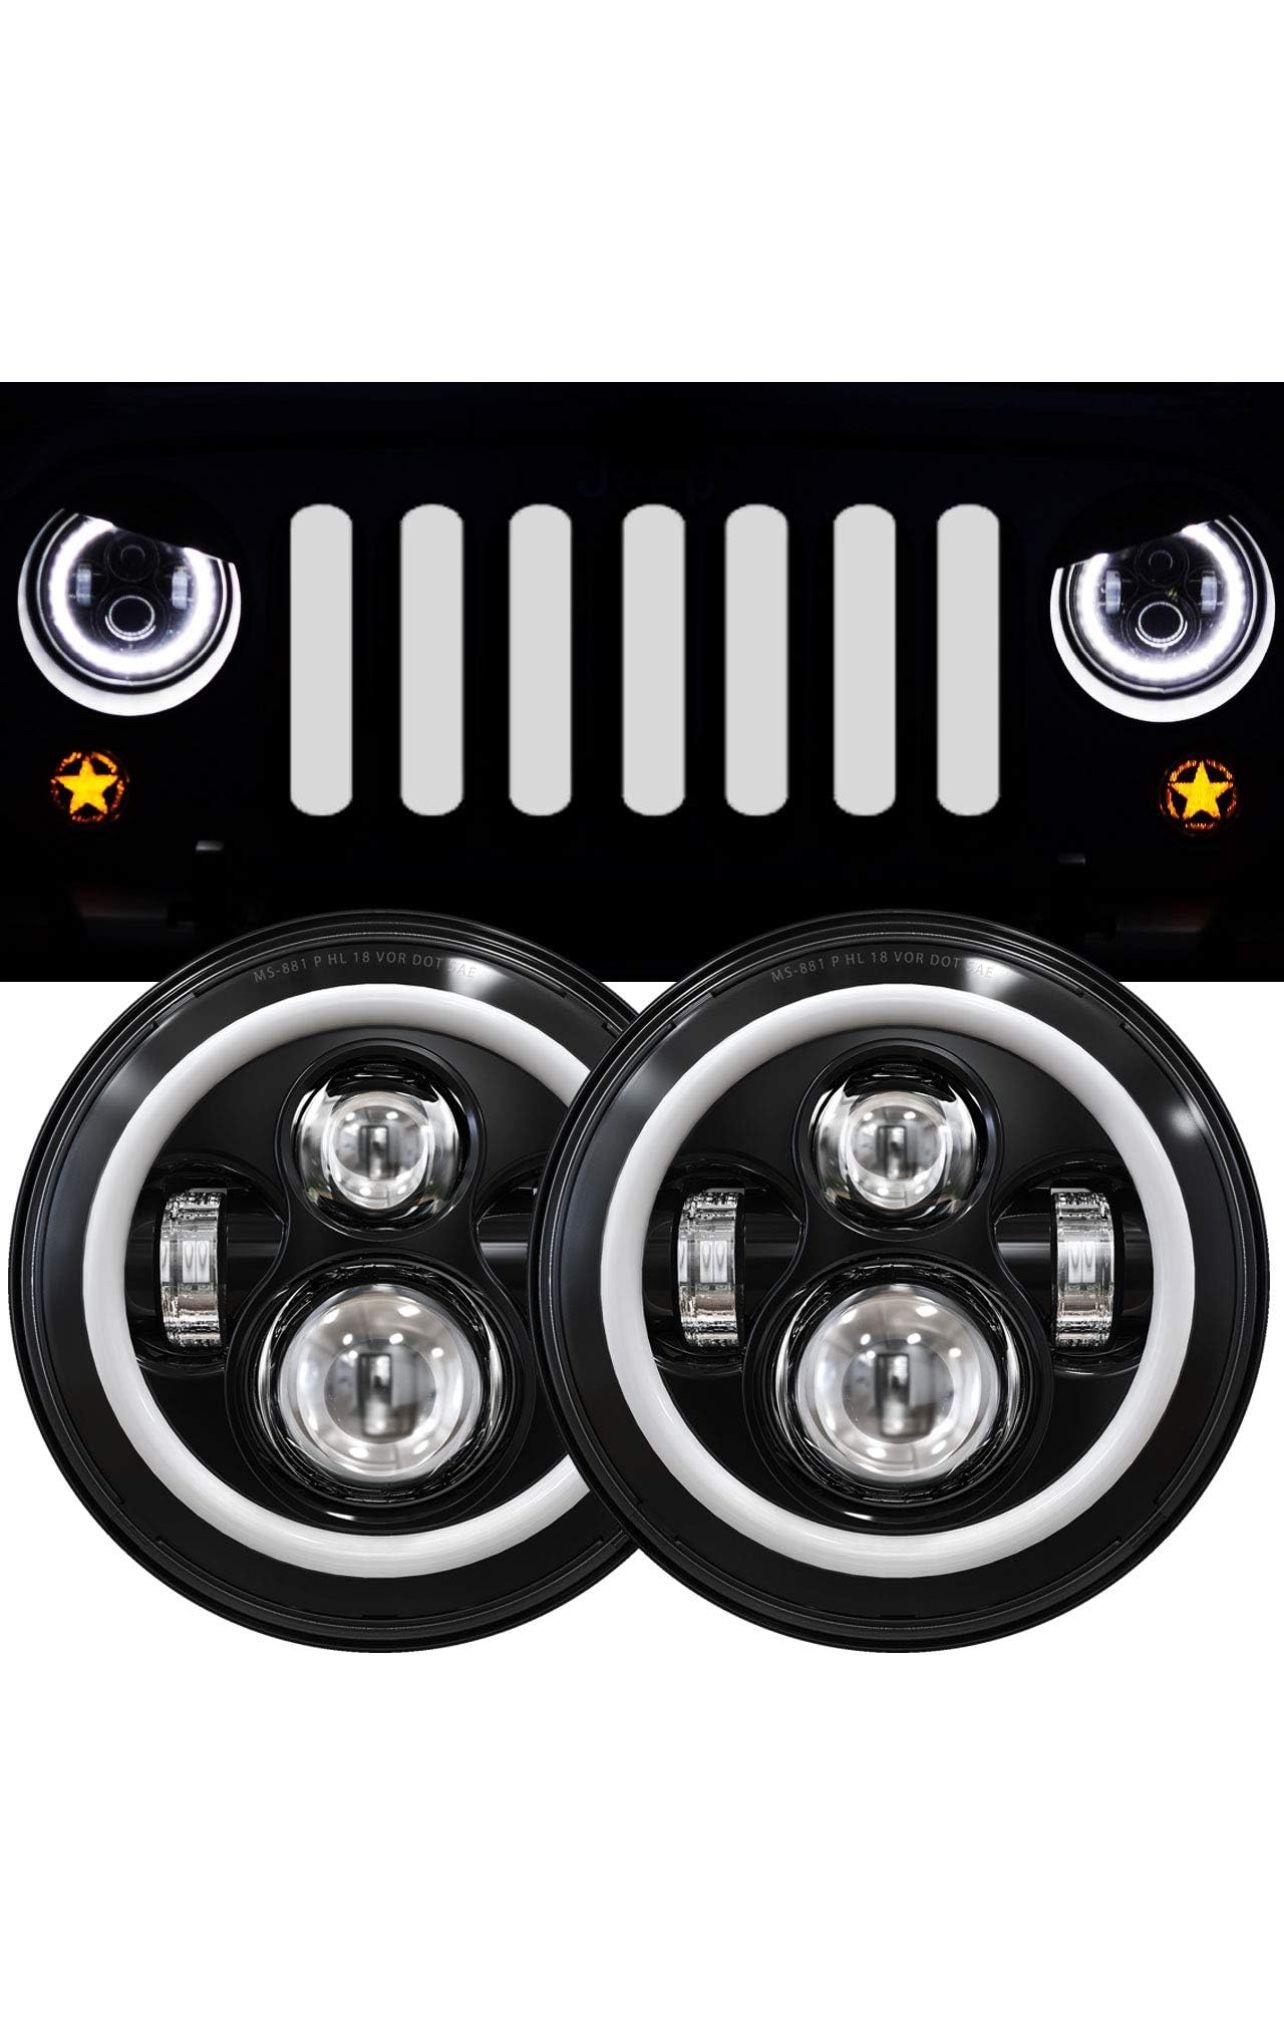 7 Inch LED Halo Headlights with Turn Signal Amber White DRL Compatible with 2007-2017 Jeep Wrangler JK JKU- Black